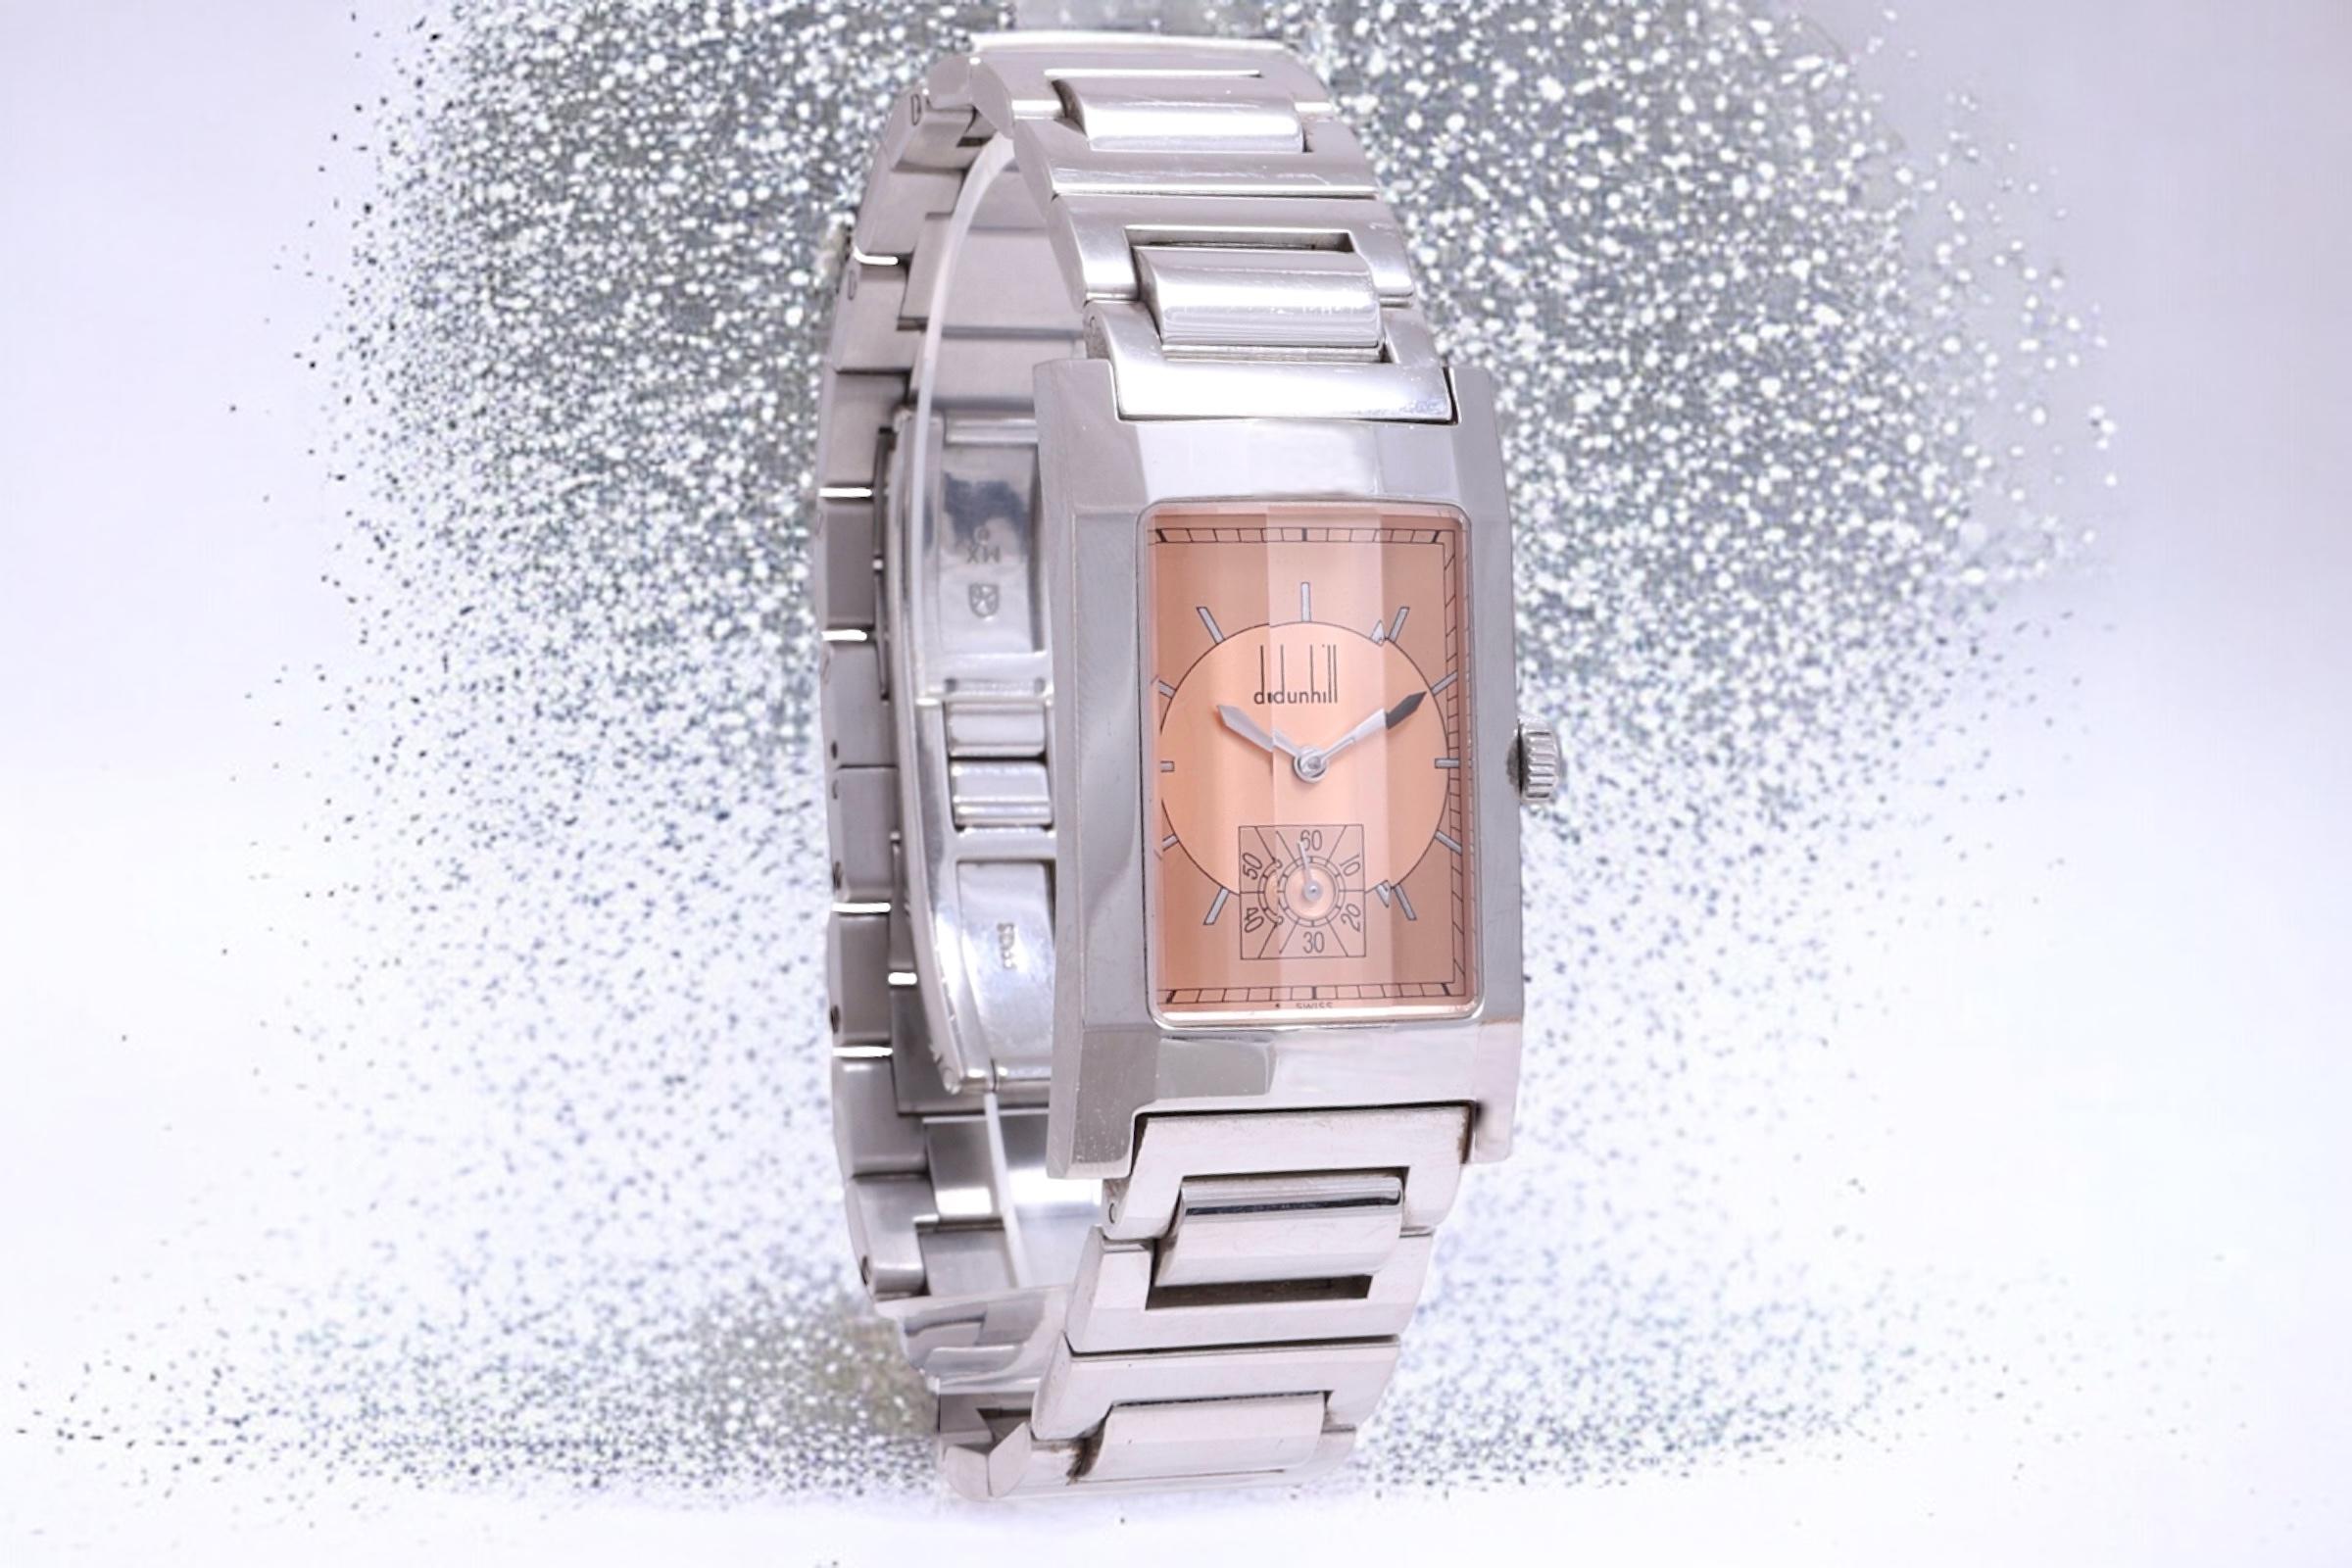 Stainless Steel Dunhill Facet Wrist Watch  For Sale 7